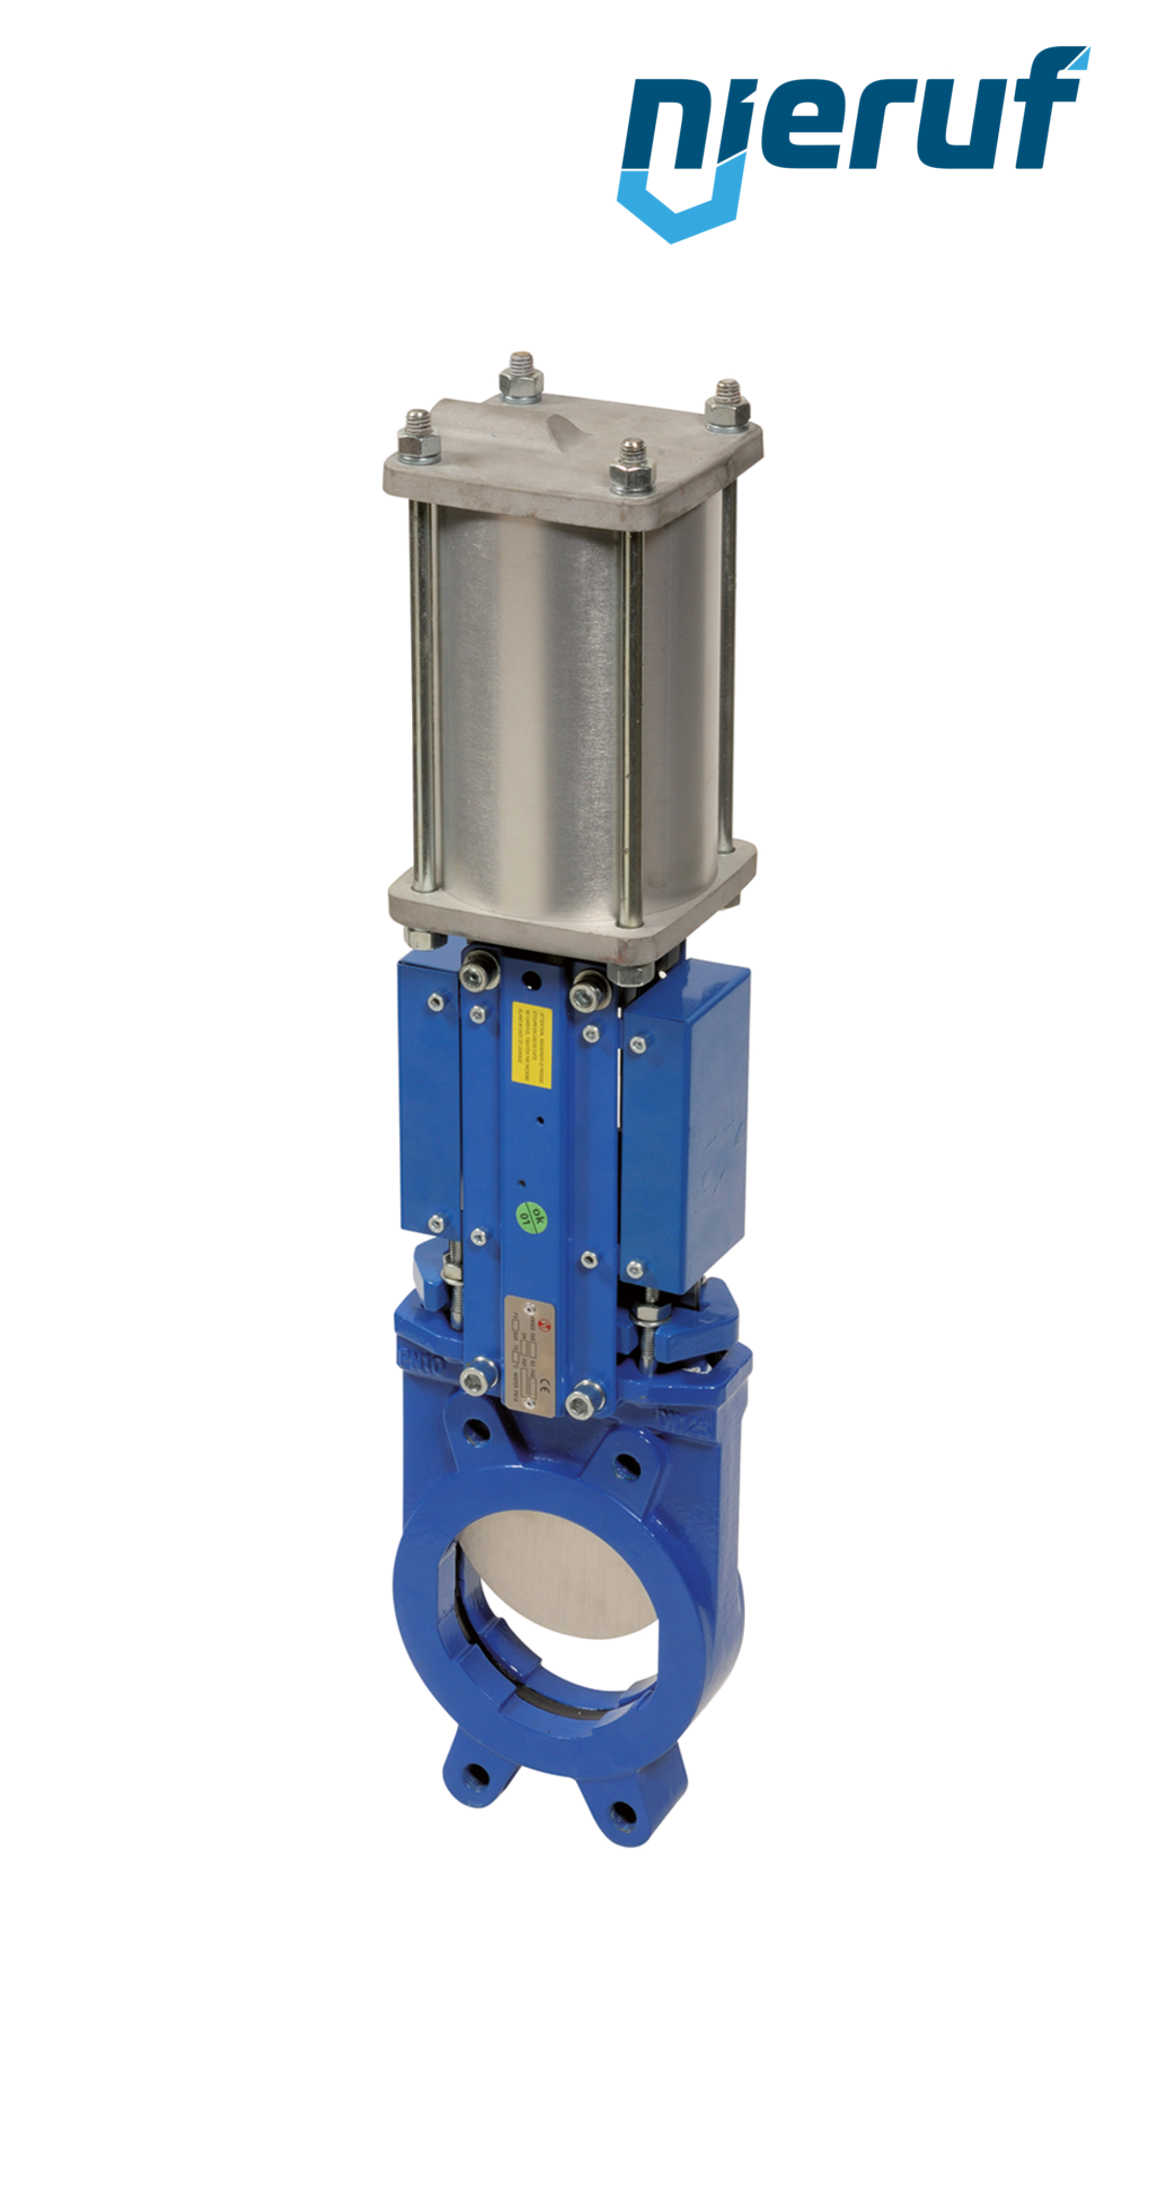 Knife gate valve DN 100 SR01 NBR pneumatic actuation double acting